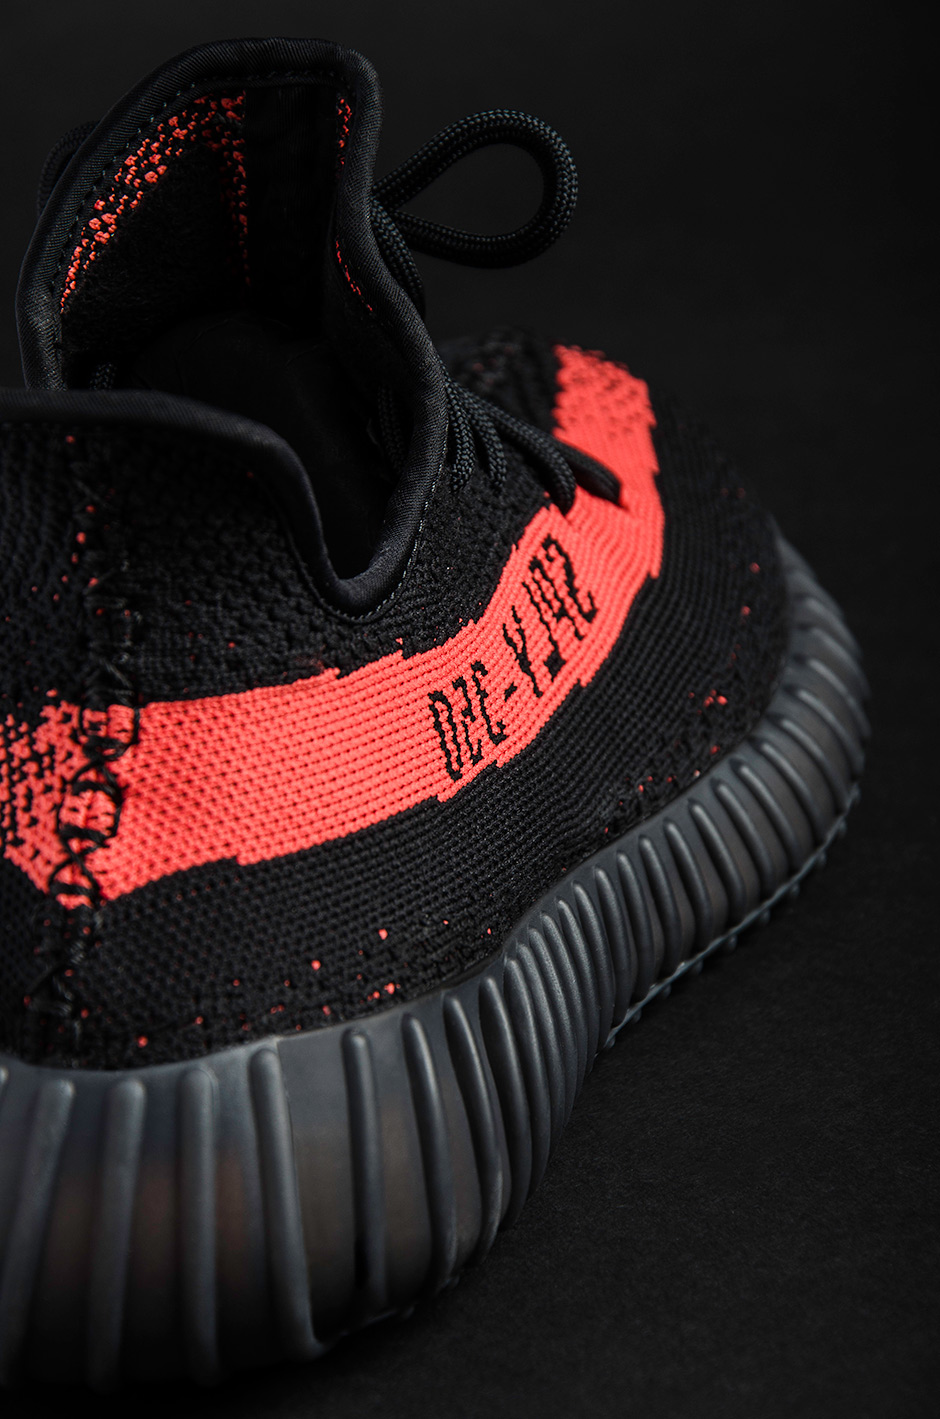 cheapest yeezy boost